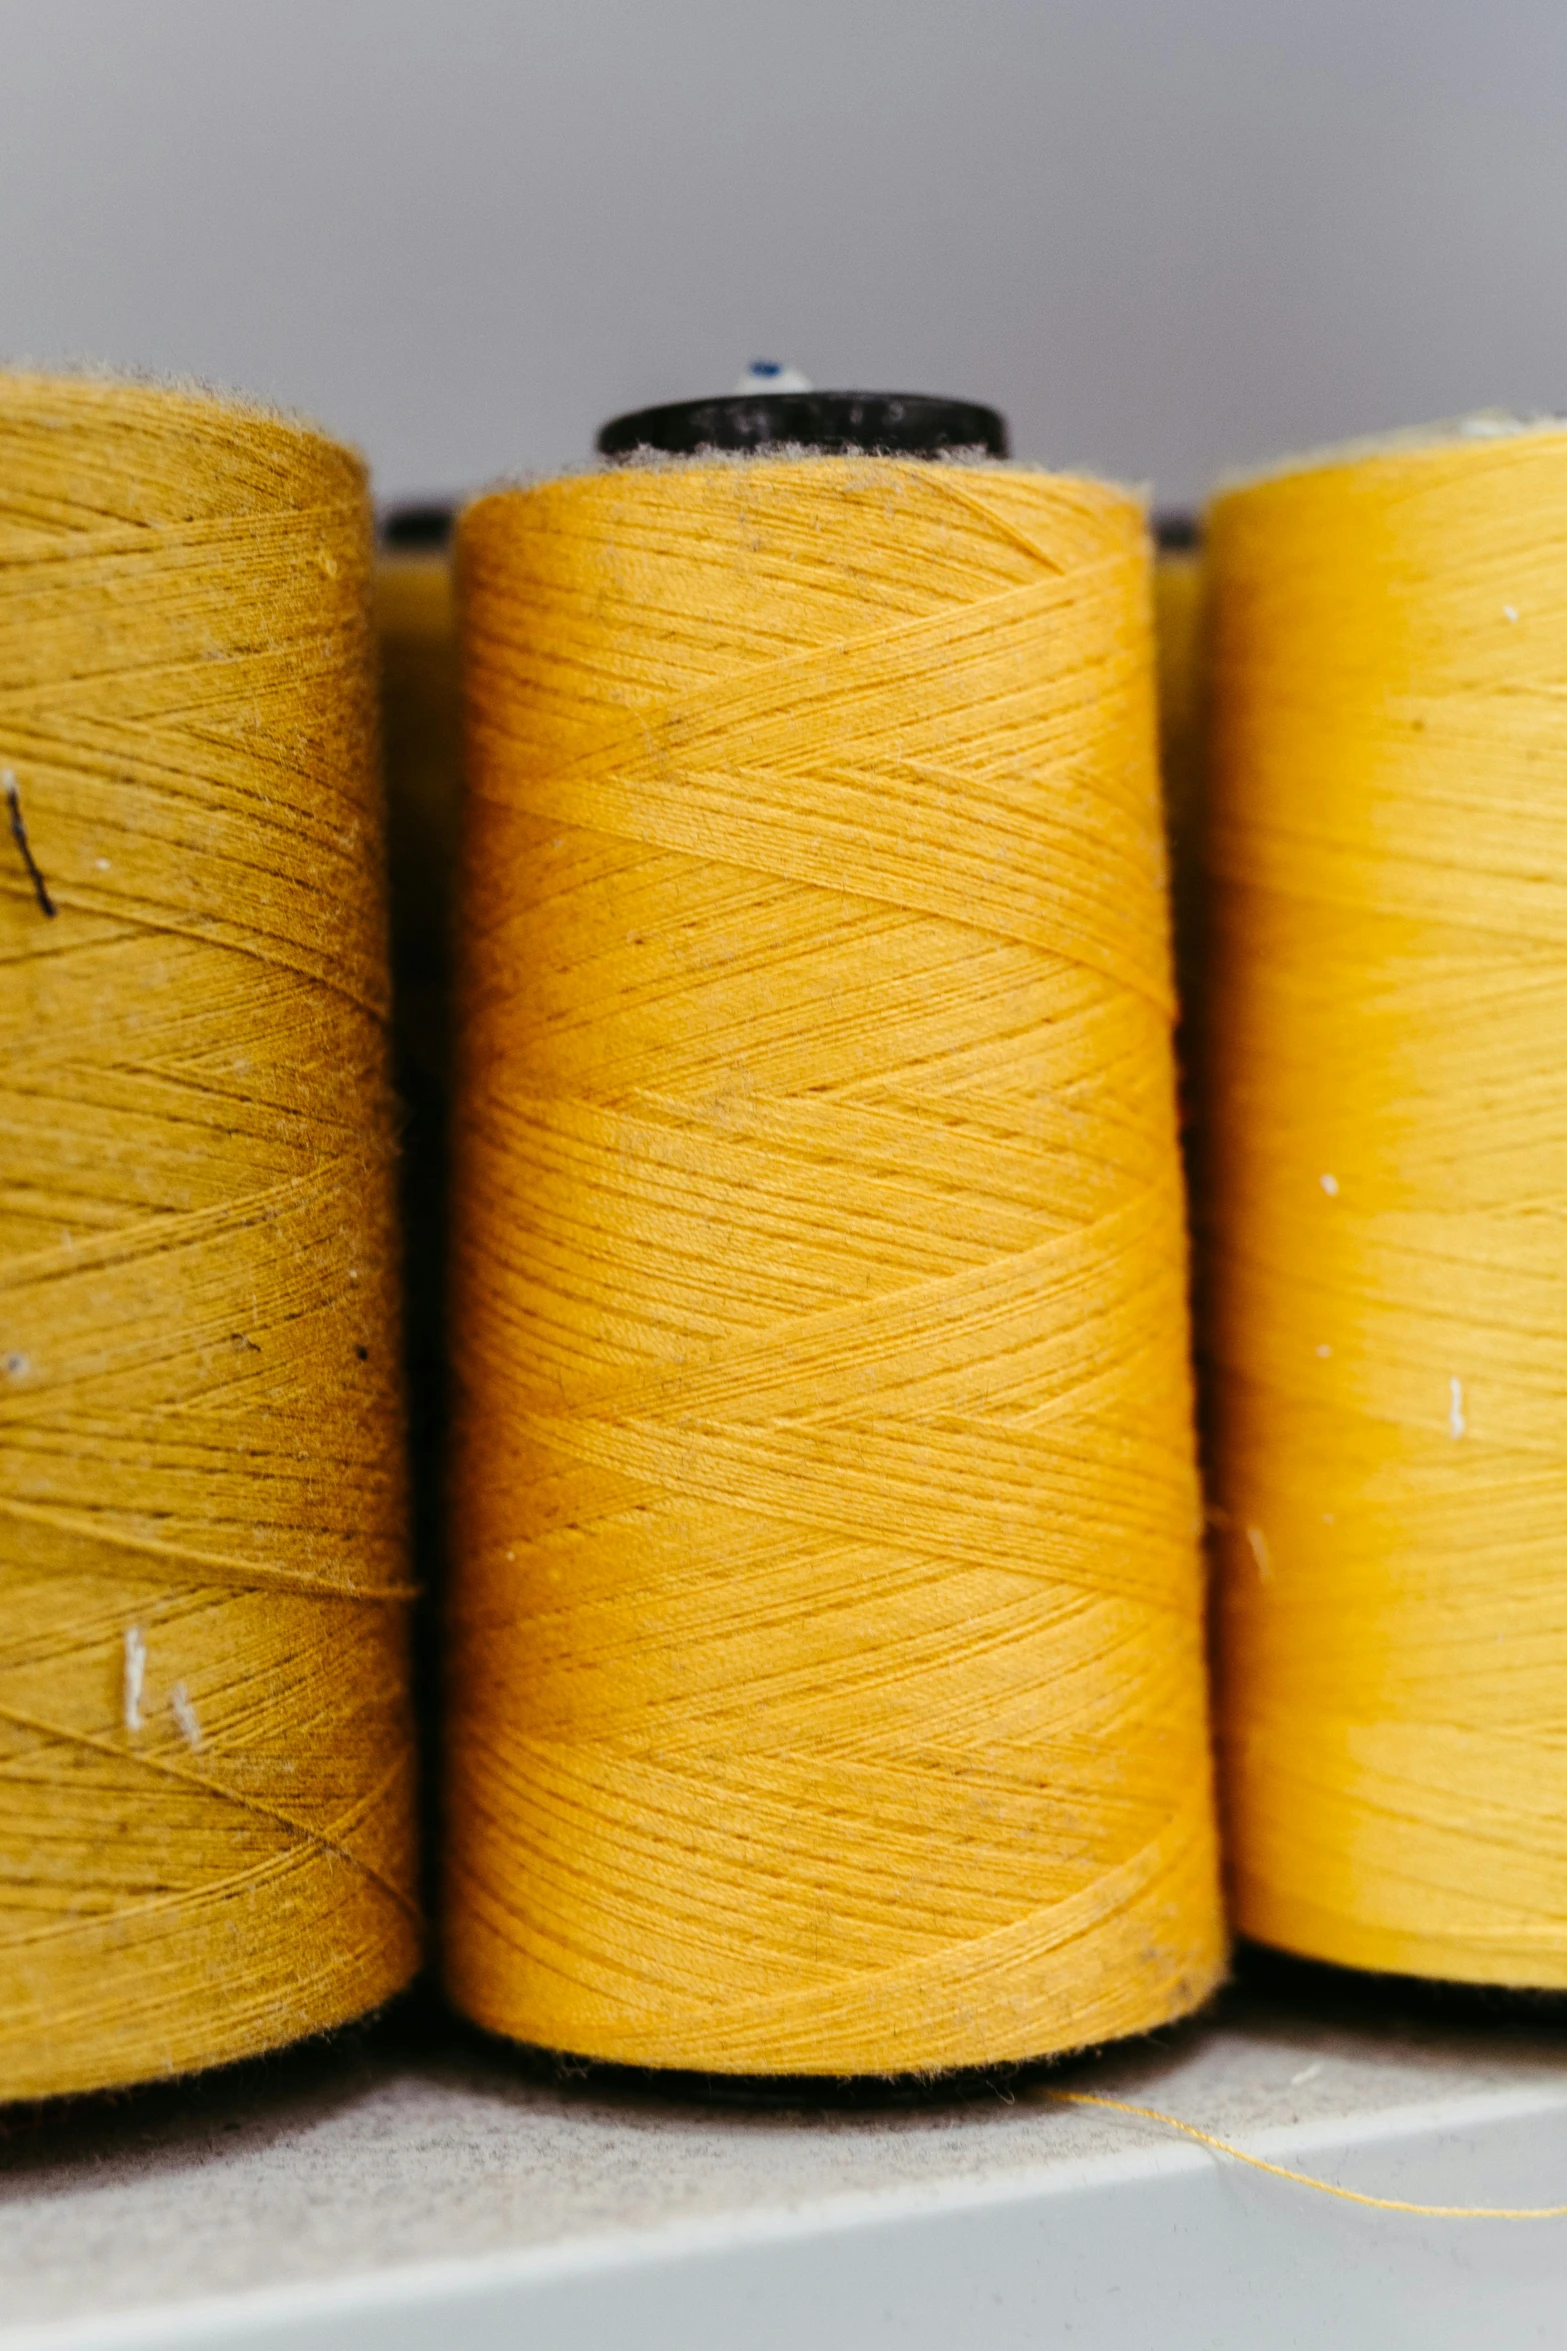 yellow spools of thread on a table next to two ends of yellow string